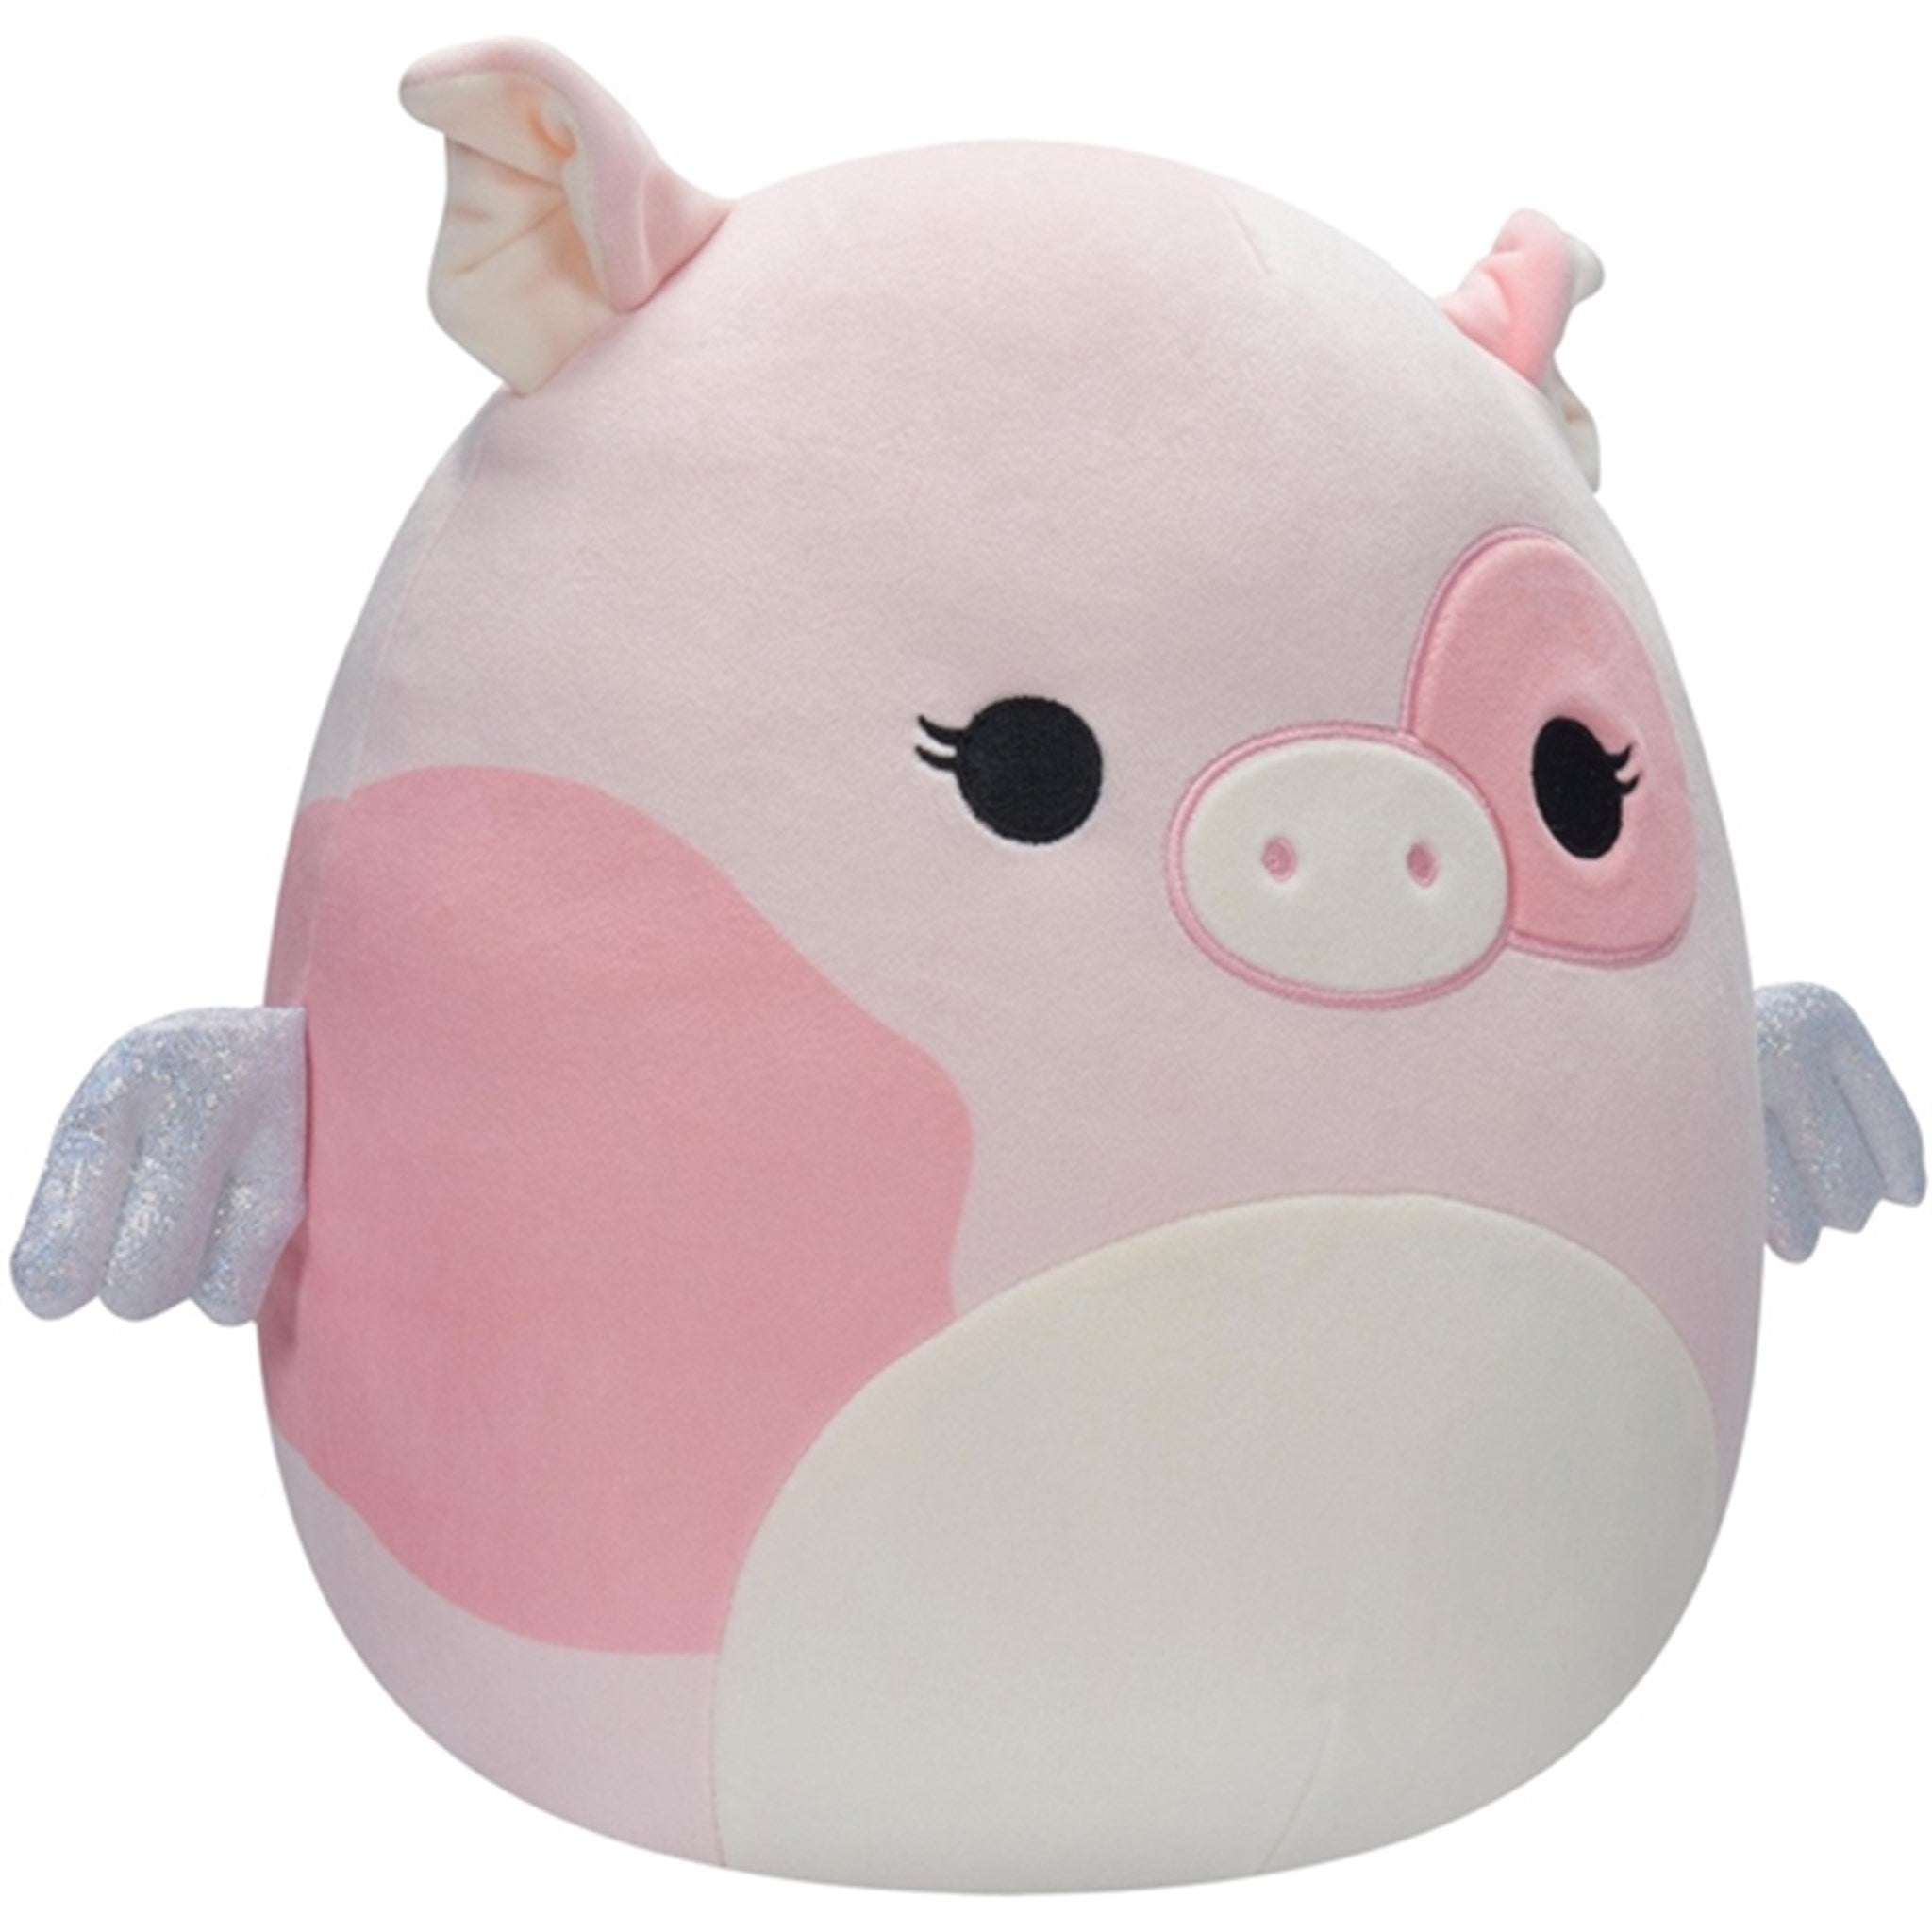 Squishmallows Peety the Pink Pig 30 cm P14 2